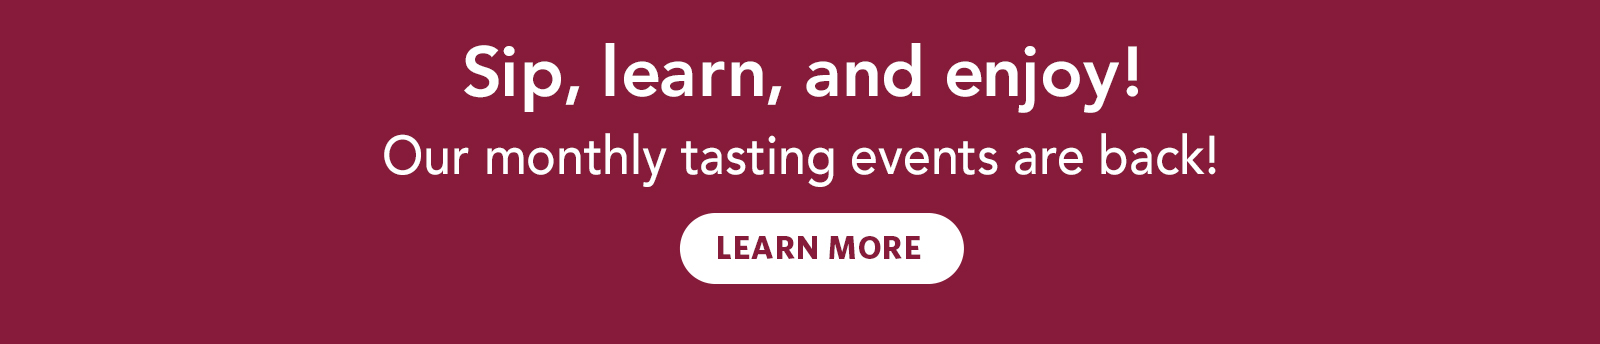 Sip, learn, and enjoy! Our monthly tasting events are back! Learn More